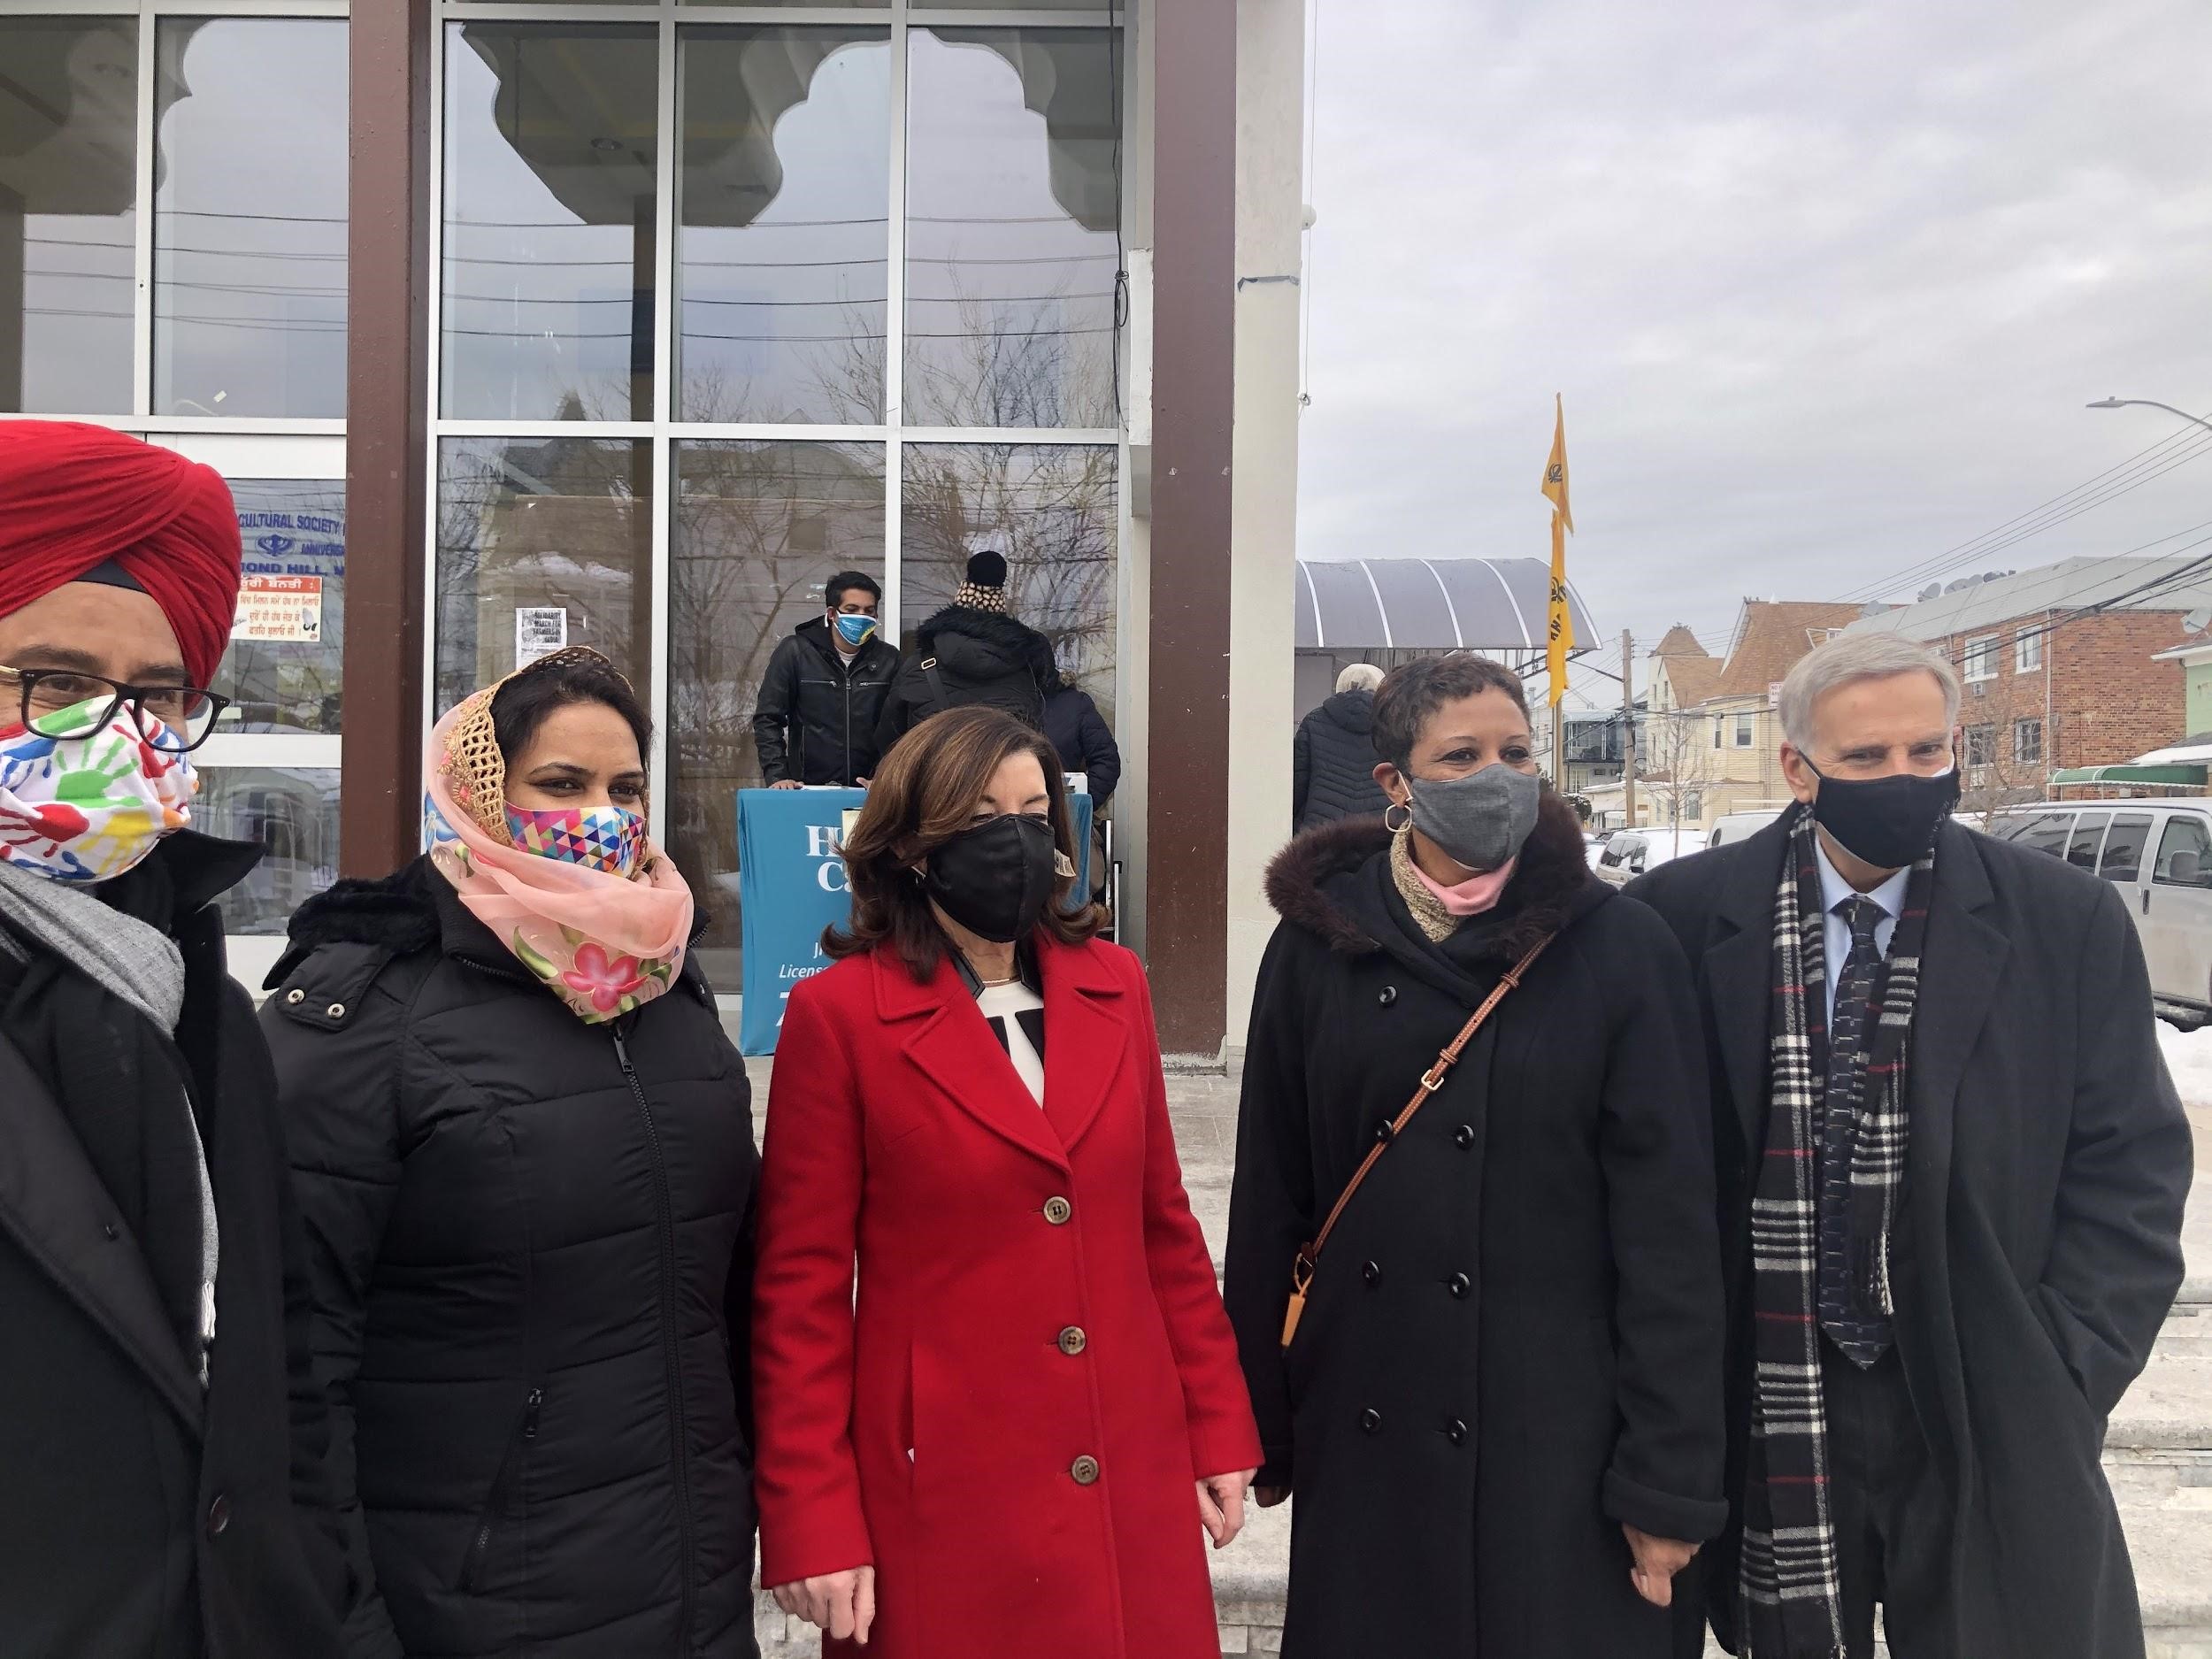 Assemblyman David Weprin toured the Sikh Cultural Society as it was being transformed into a pop-up vaccination site alongside Council Member Adrienne Adams, Lieutenant Governor Kathy Hochul, and comm